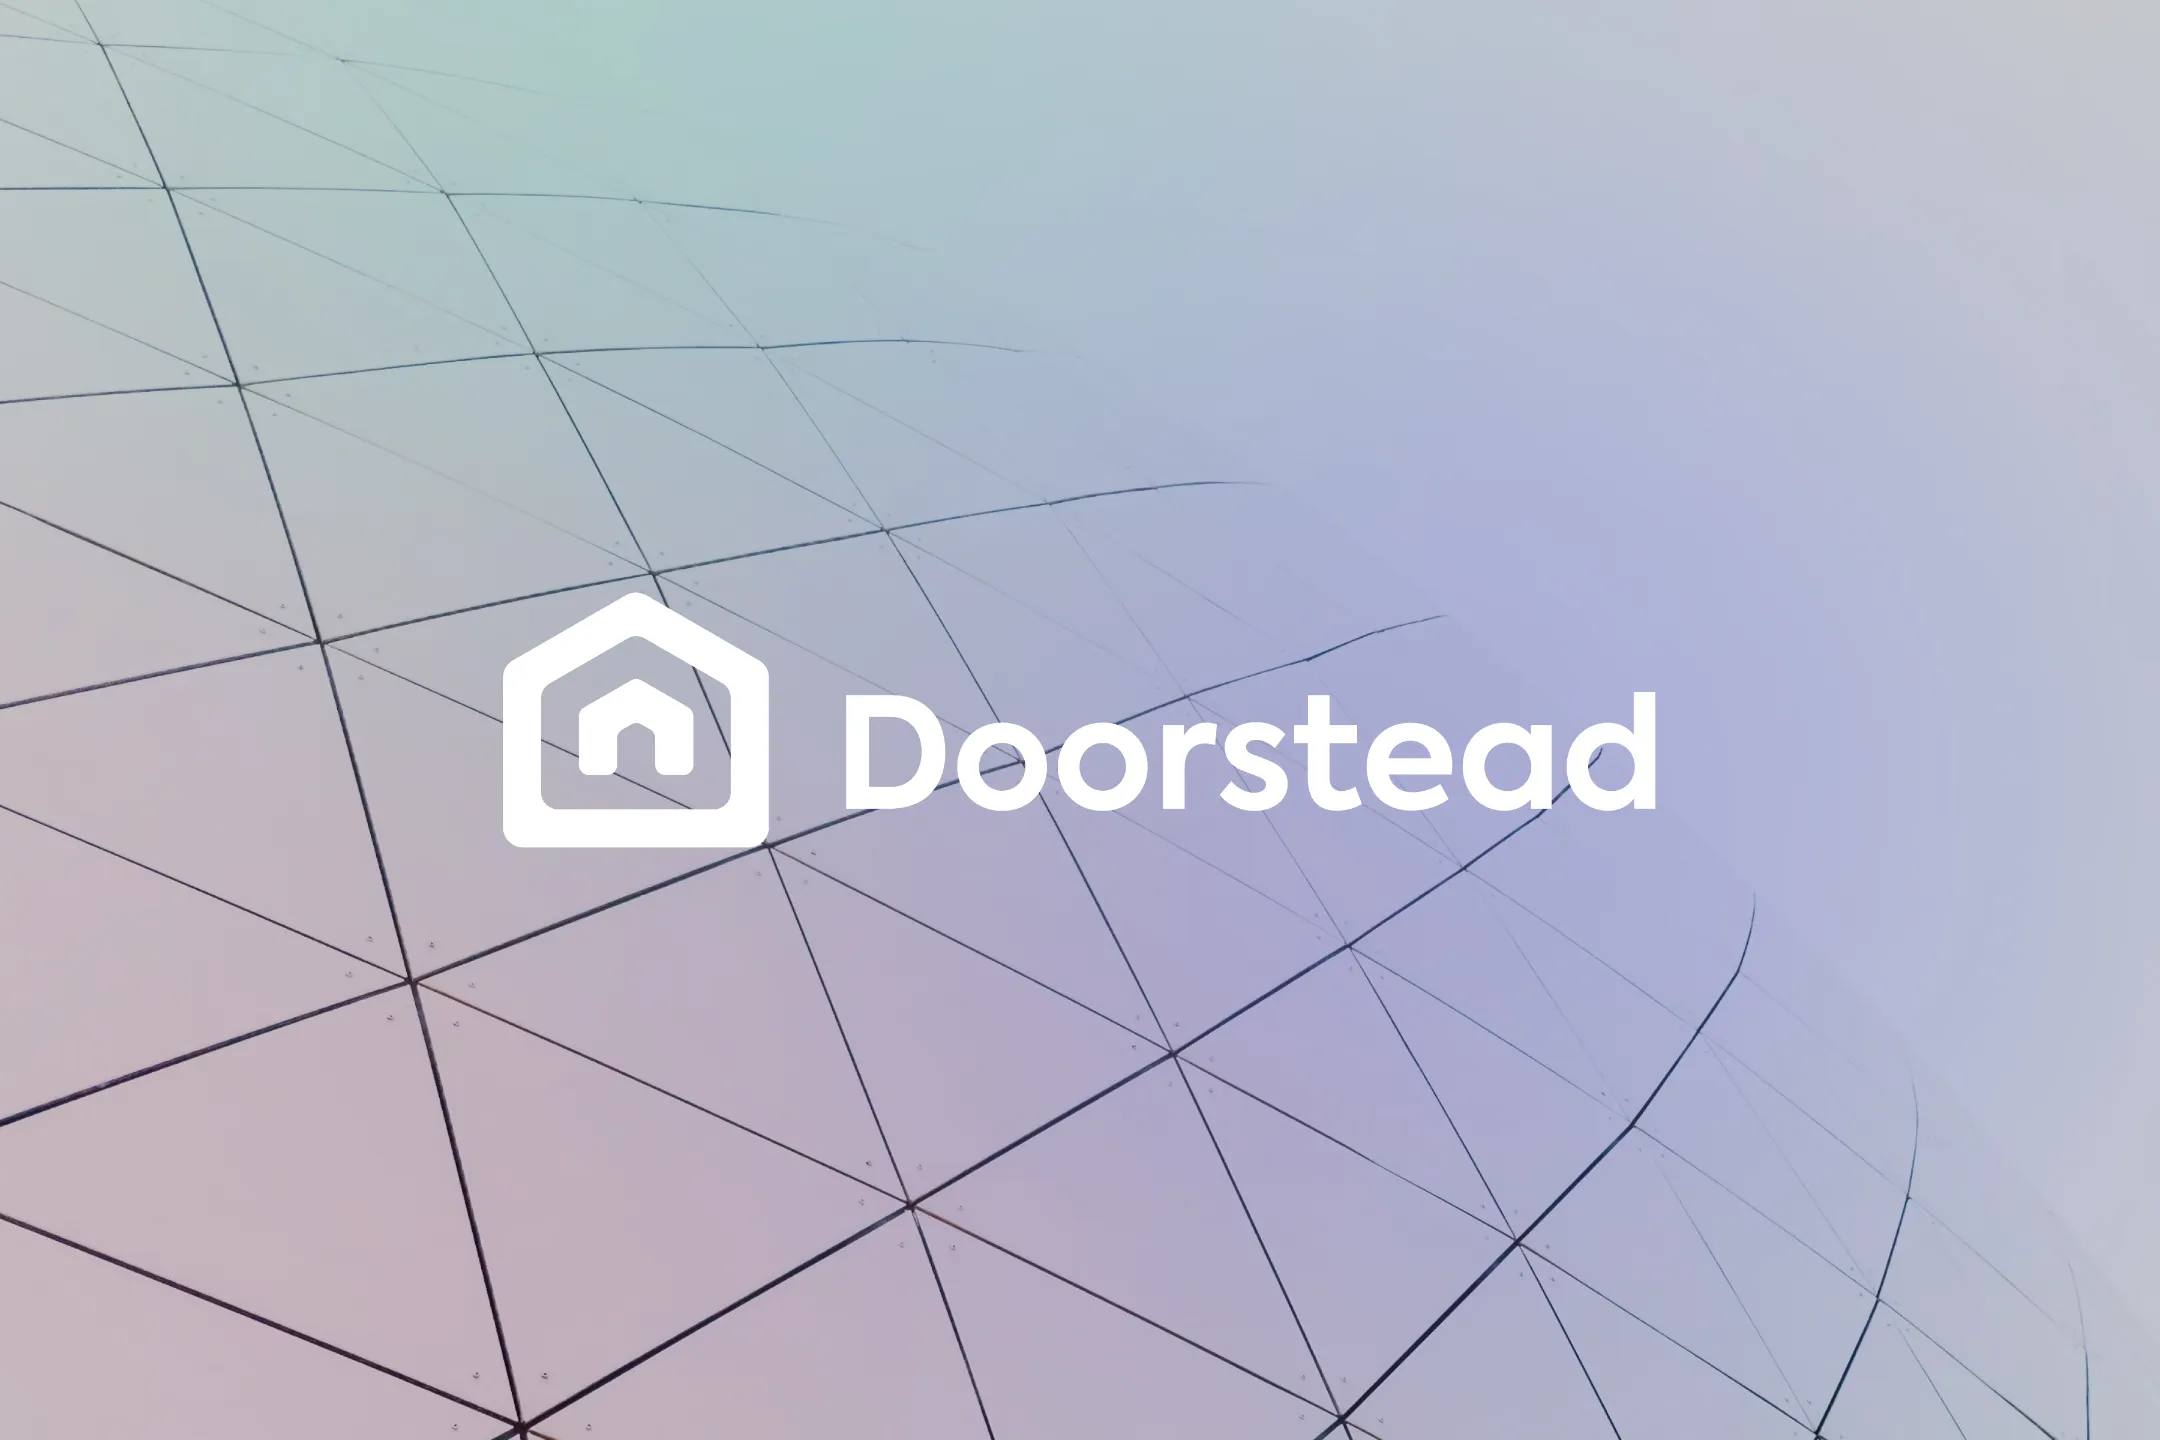 We’re excited to announce Doorstead’s $21.5M Series B funding and acquisition of Knox Financial’s Massachusetts Portfolio